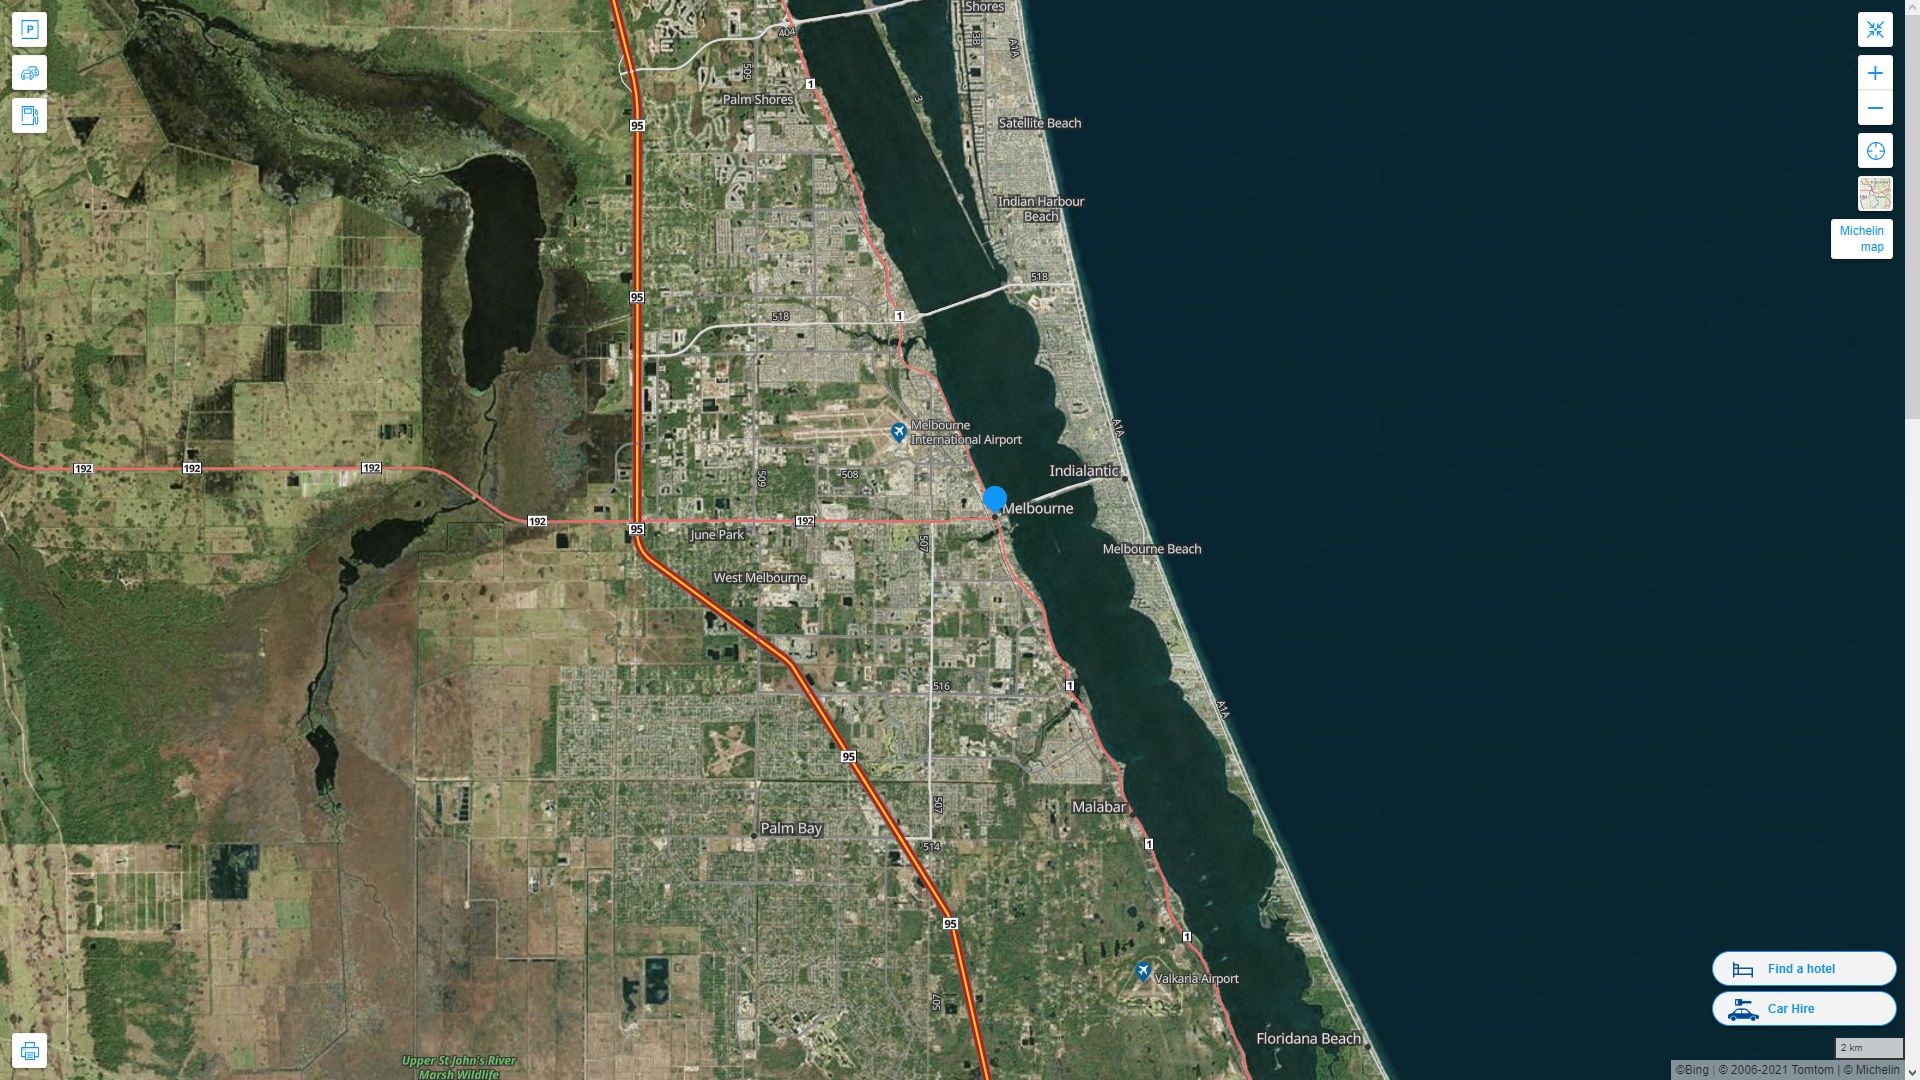 Melbourne Florida Highway and Road Map with Satellite View